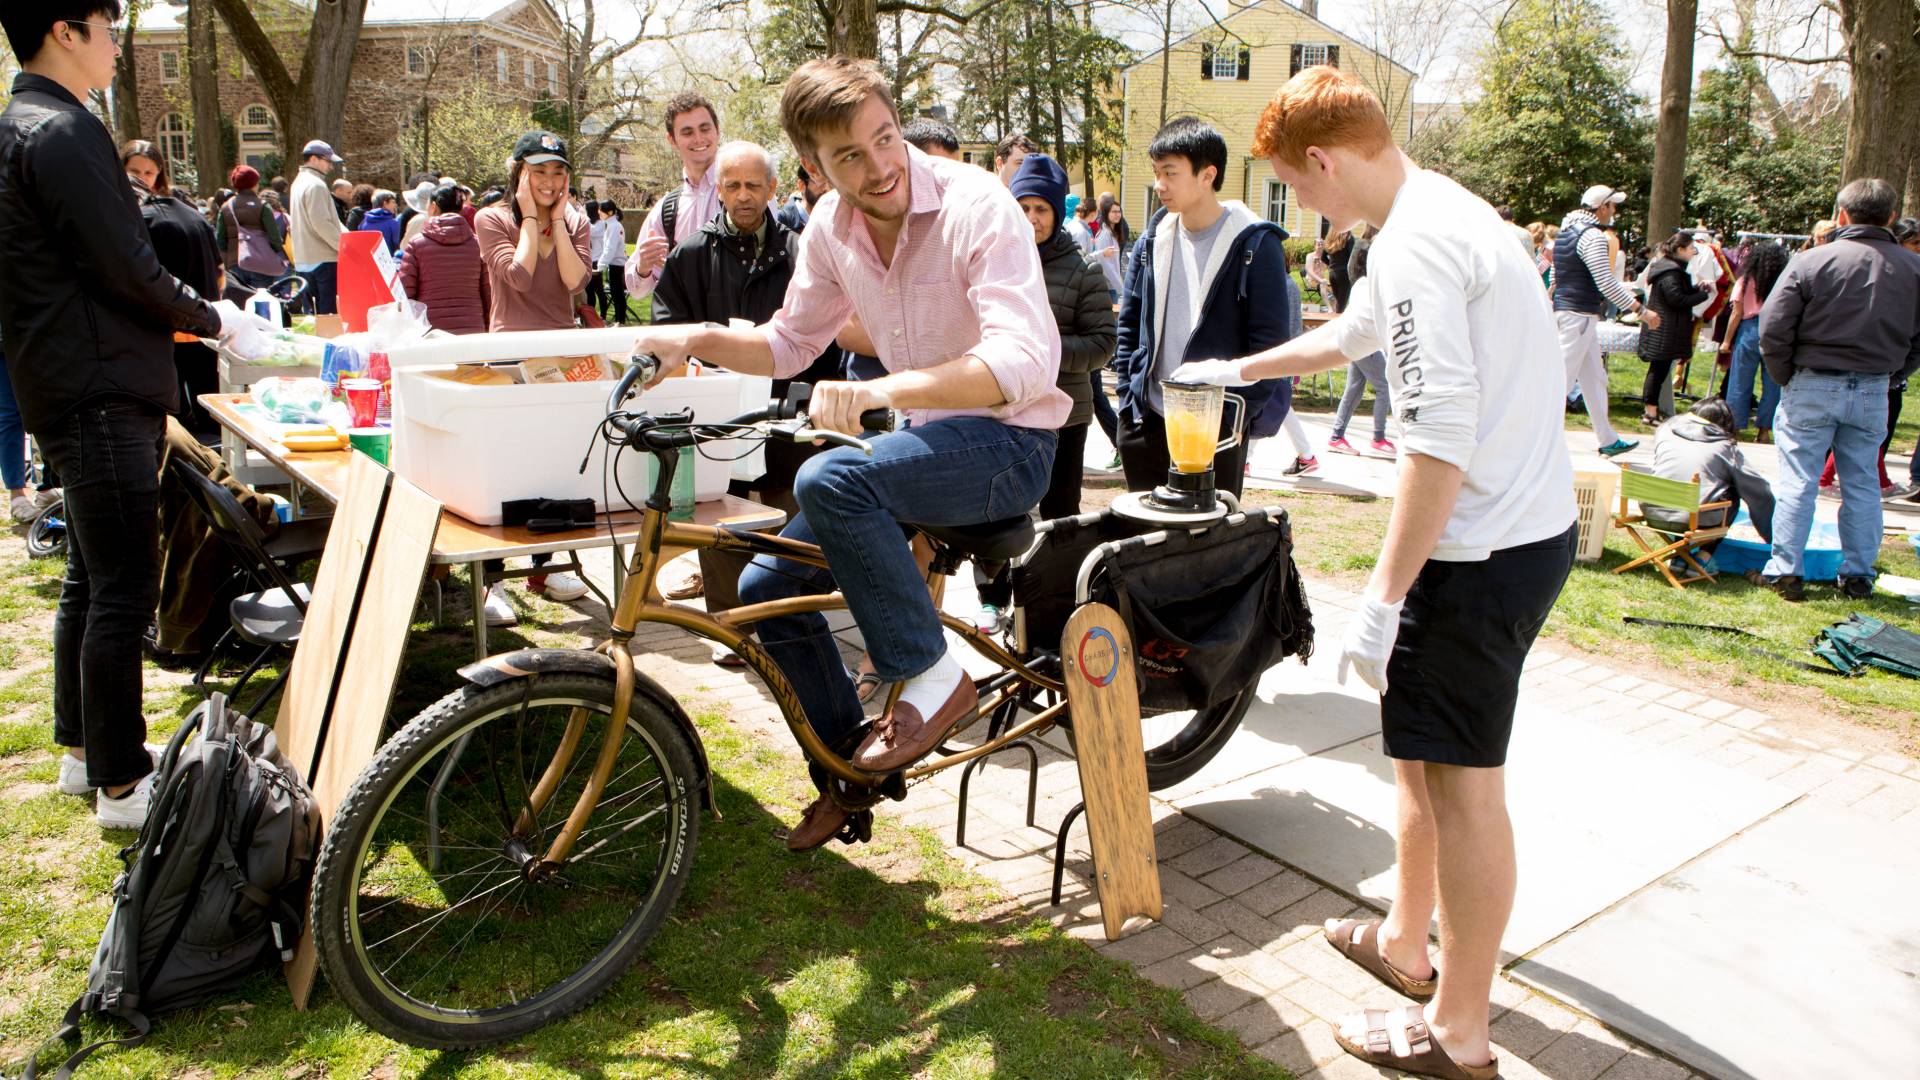 Student pedaling bicycle to power up a blender